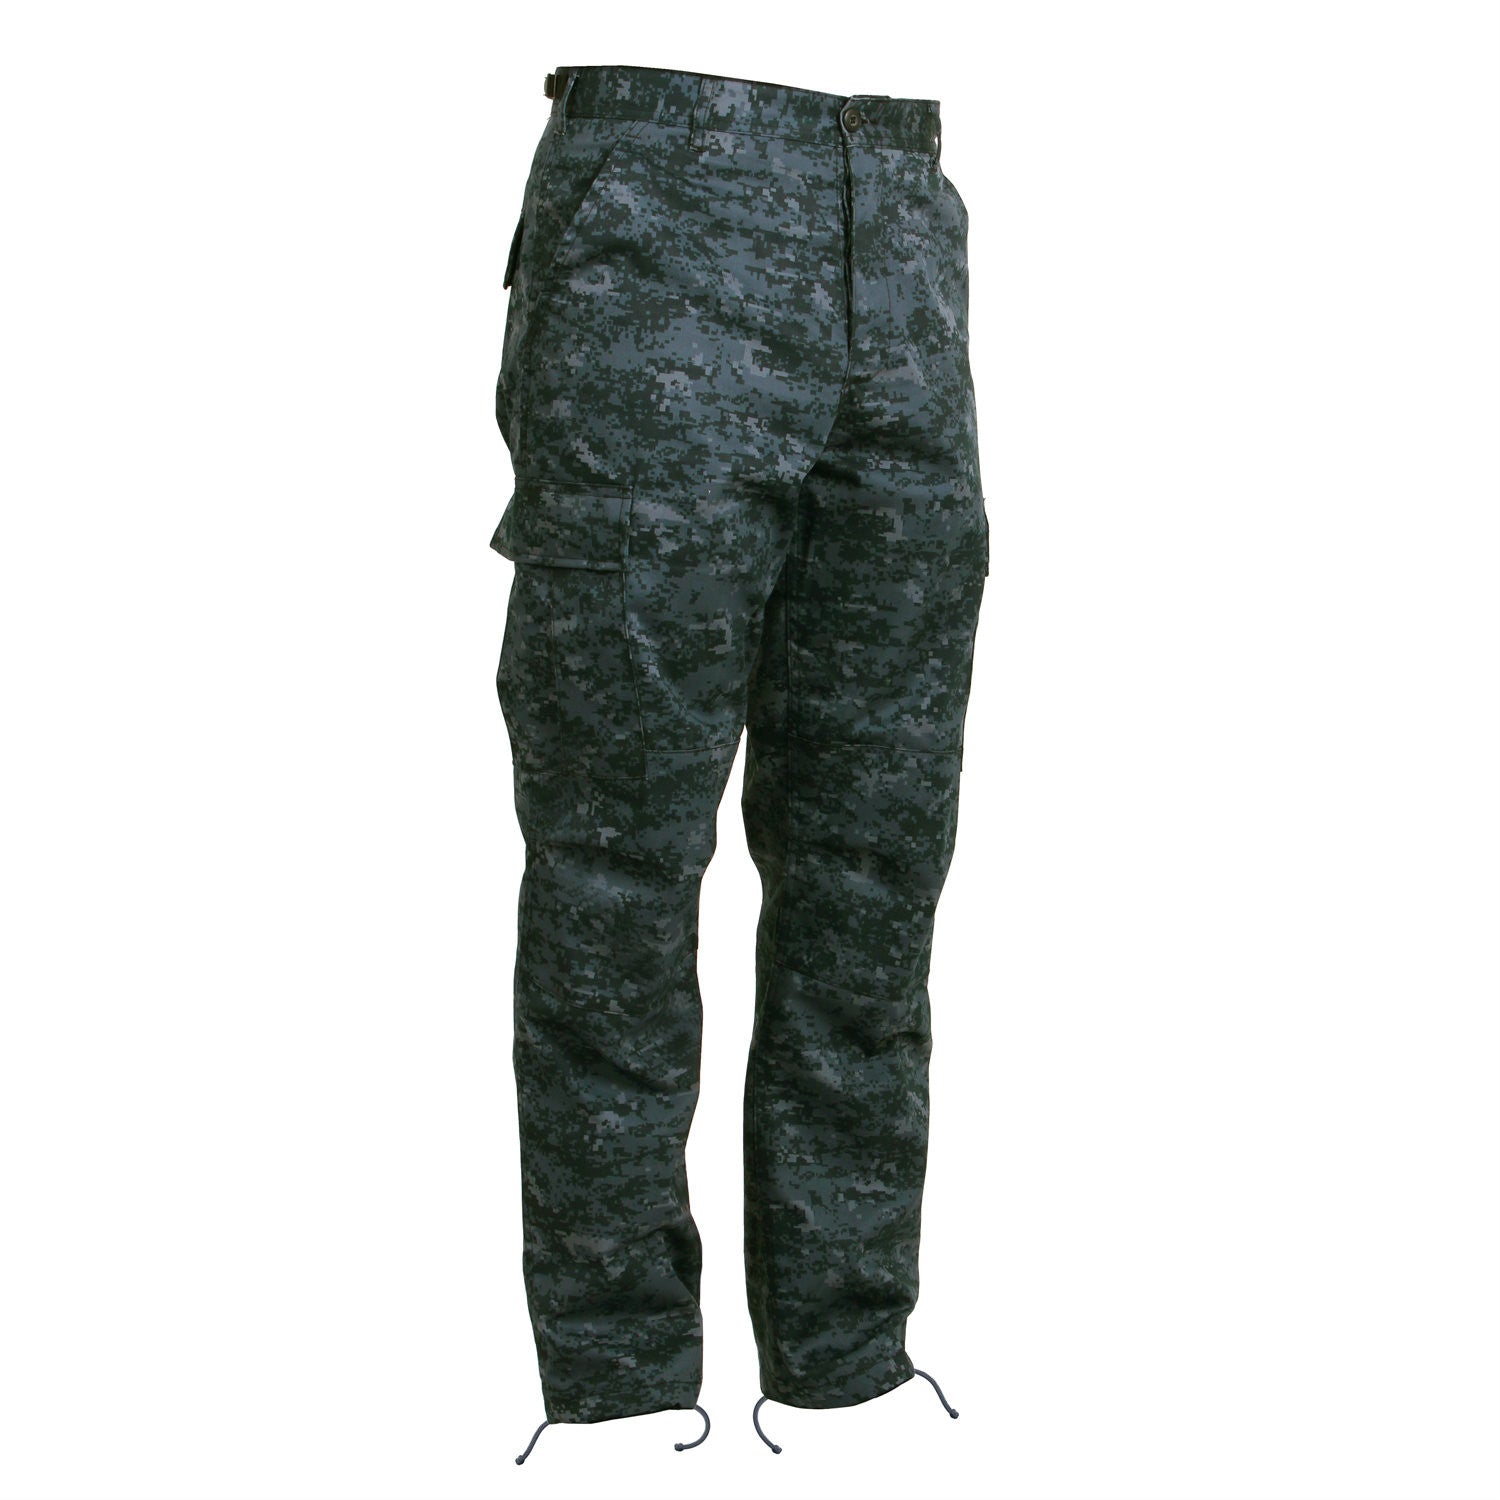 BDU Pants | Tactical Pants For Men | Midnight Blue Digital Camouflage